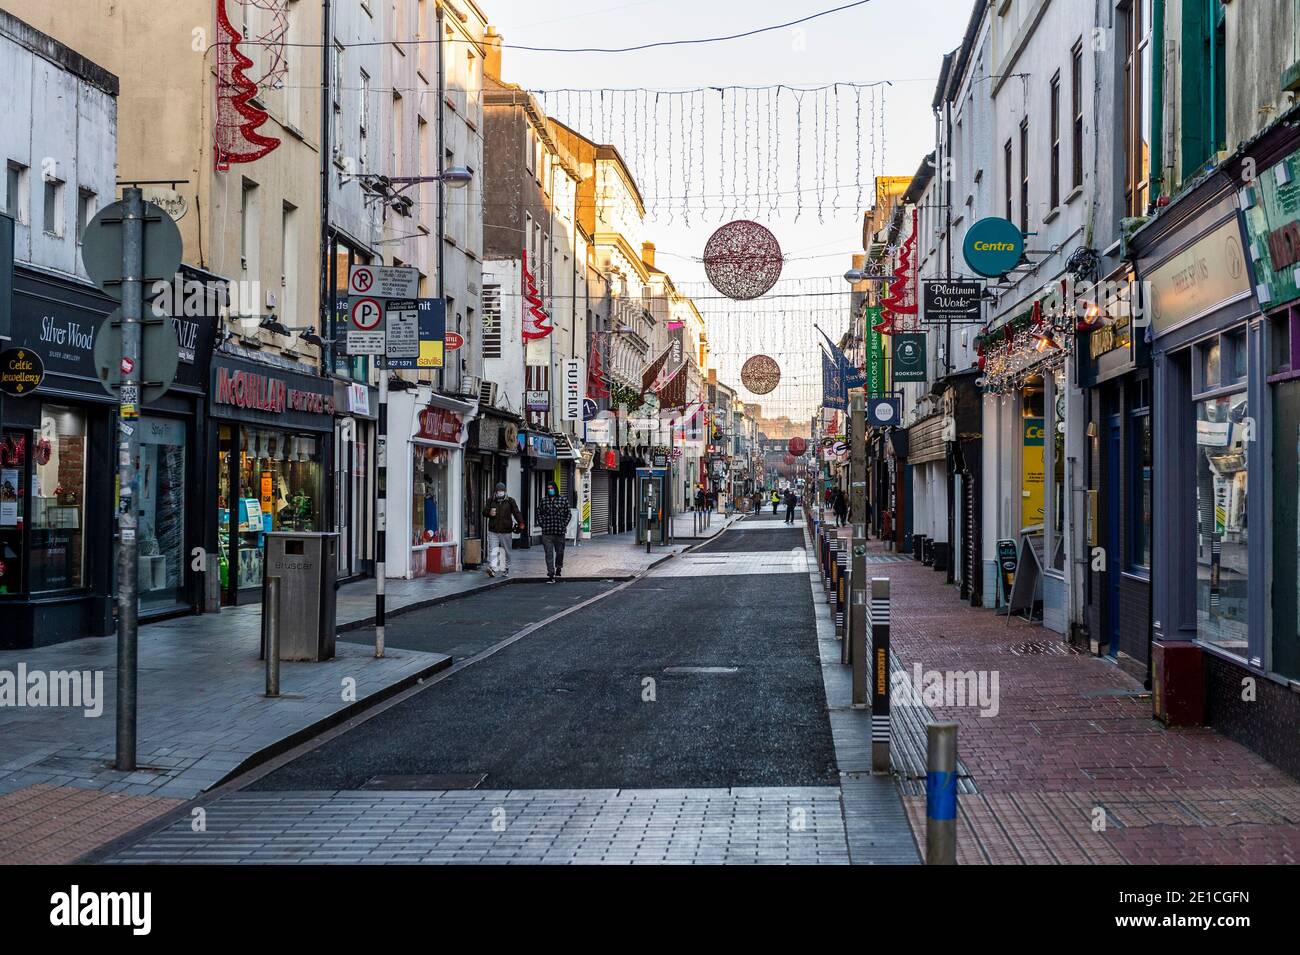 Cork, Ireland. 6th Jan, 2021. Cork city centre was quiet this afternoon, due to the Coronavirus Level 5 lockdown restrictions. Credit: AG News/Alamy Live News Stock Photo